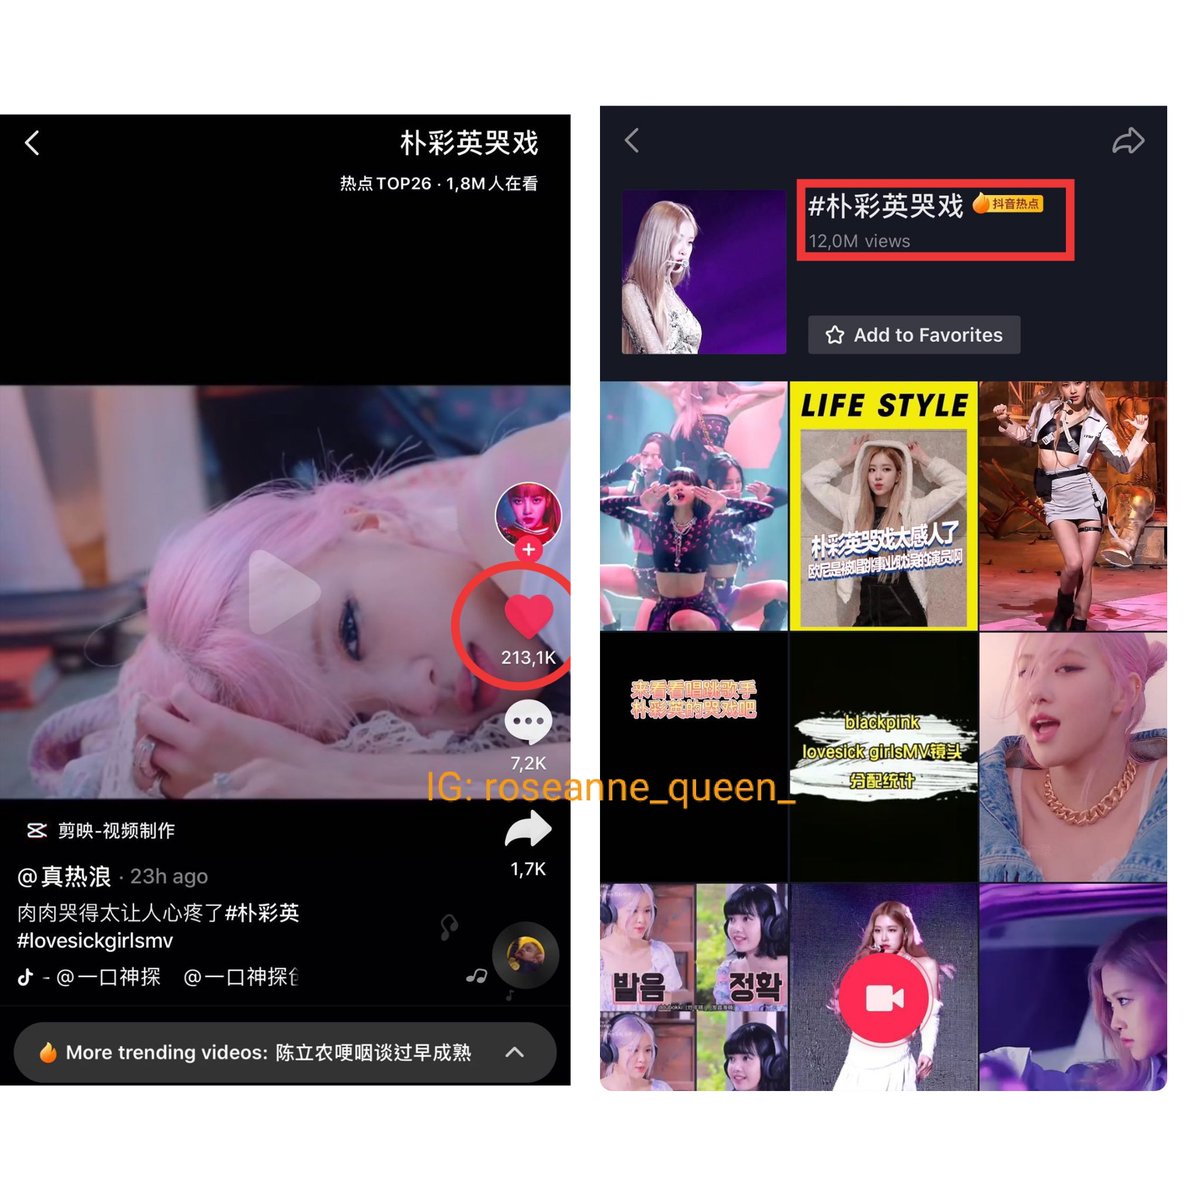 The tag is still trending at Douyin (Tiktok China) at 26 peaked at 6 with 12M views #ROSÉ  #로제